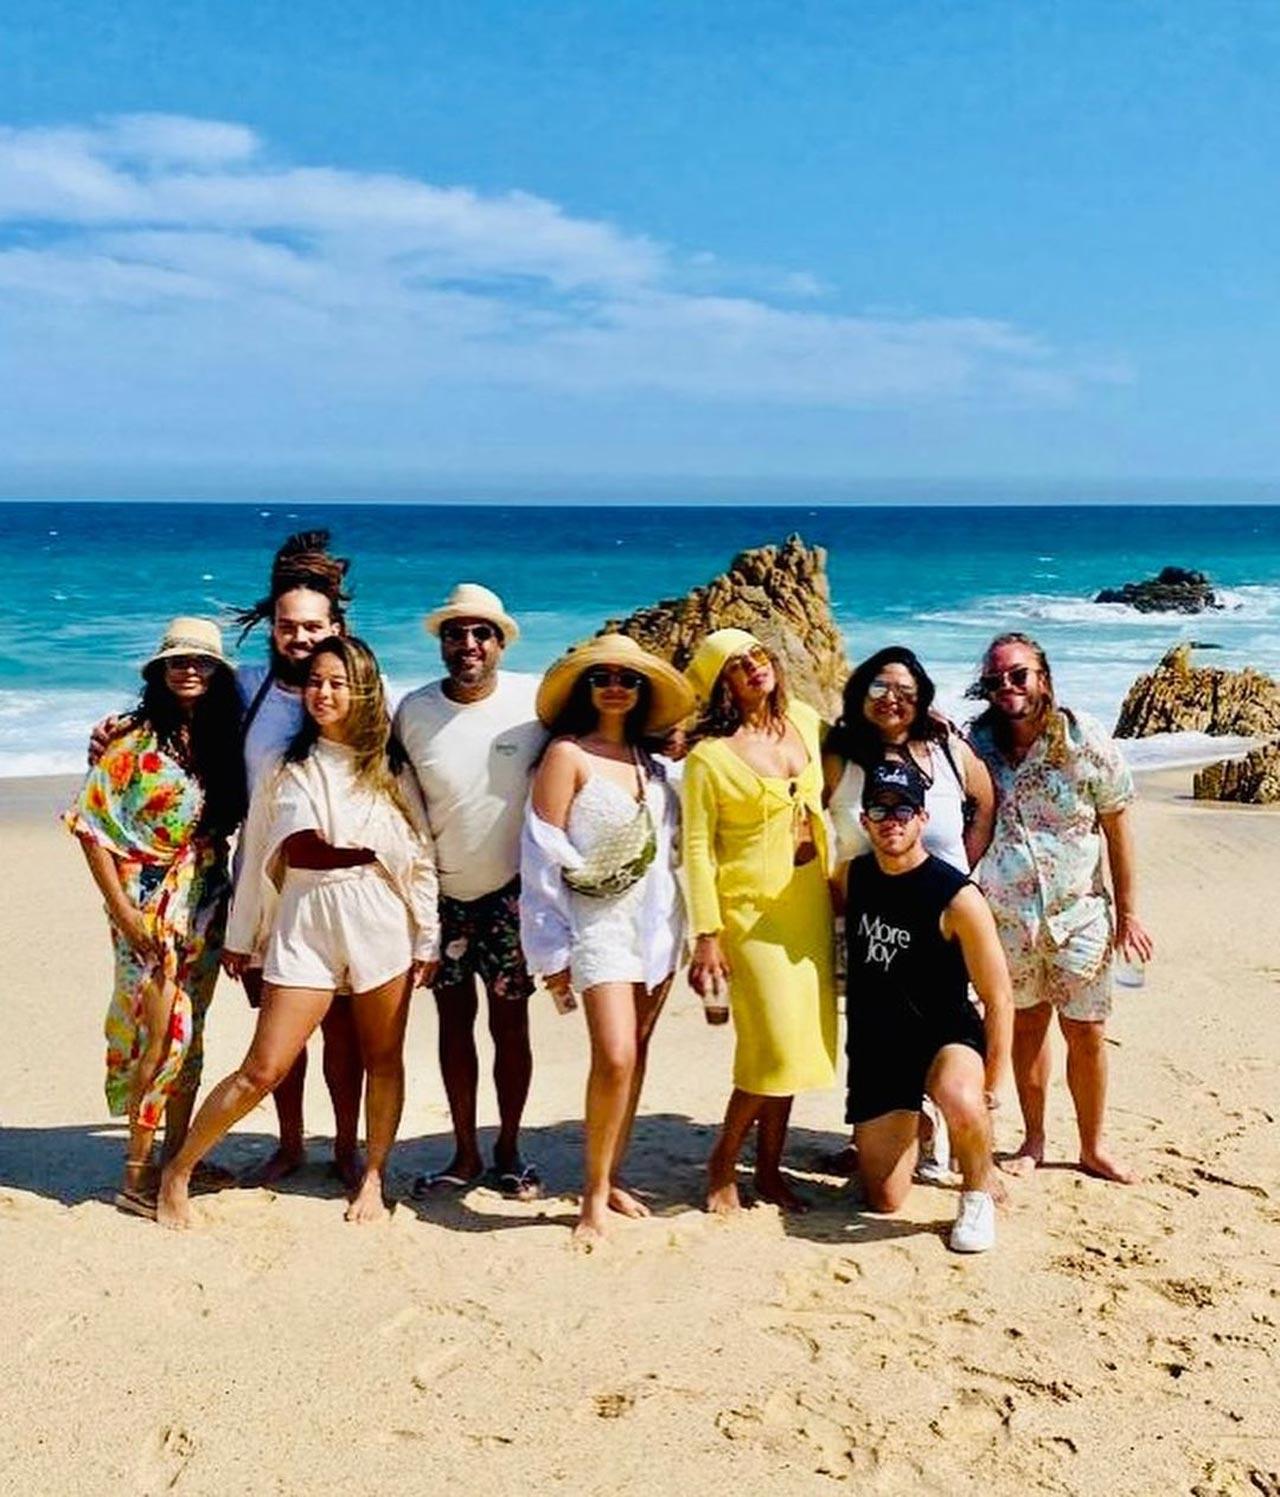 Parineeti took to Instagram, where she shared pictures from the birthday celebration, which included Priyanka's husband Nick Jonas and mother Madhu Chopra among friends in Mexico